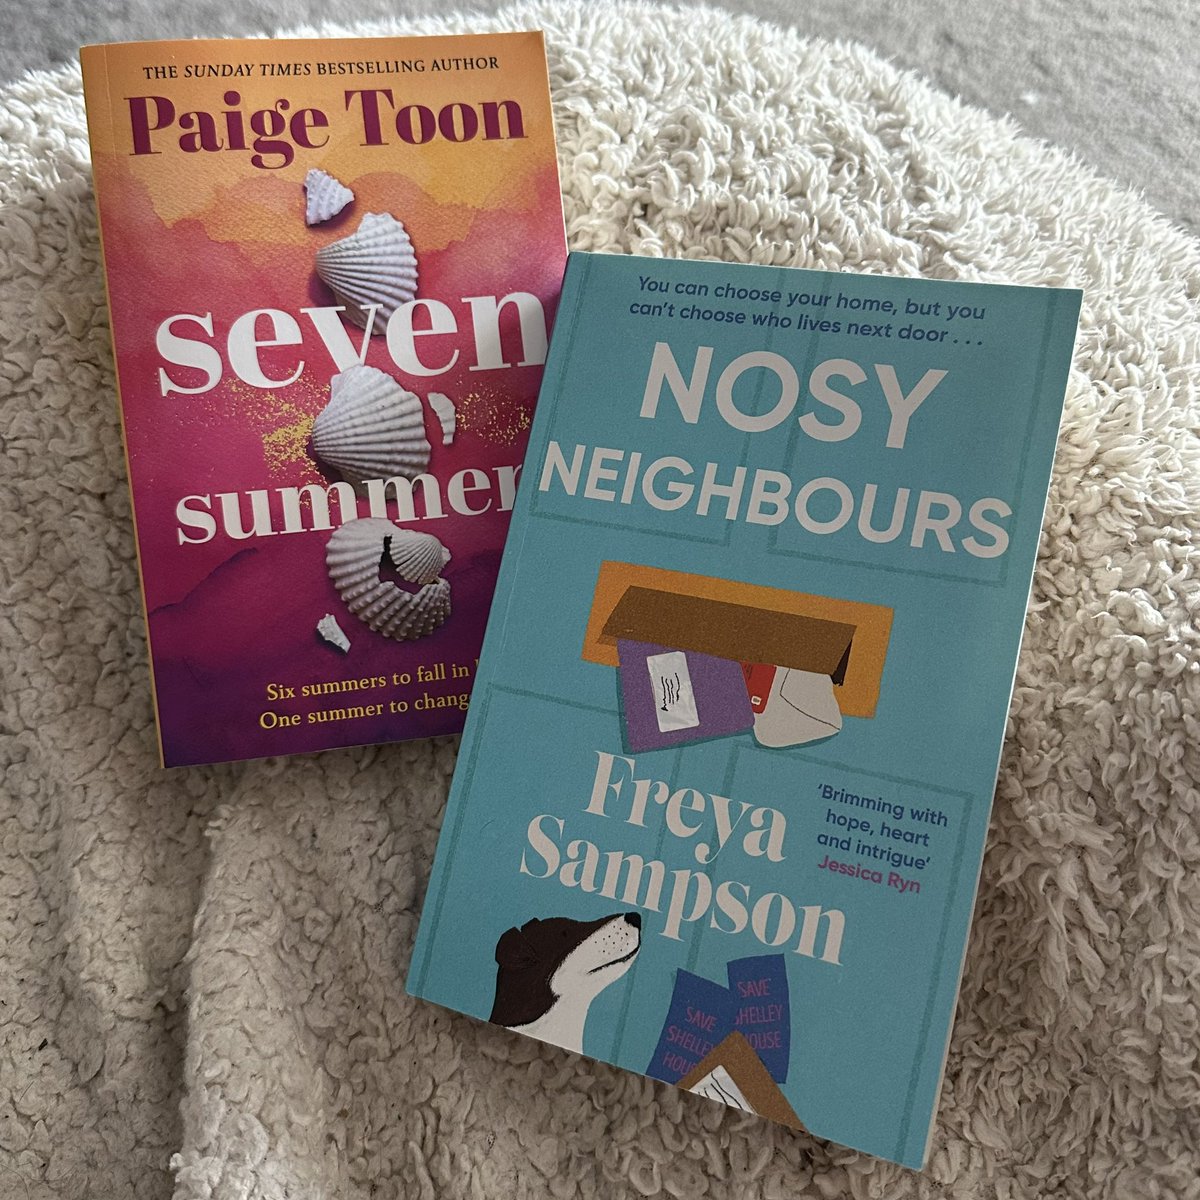 Finished both #SevenSummers by @PaigeToonAuthor & #NosyNeighbours by @SampsonF whilst away on holiday & loved them both!😍📚

Excited to be part of the upcoming #blogtours for both titles over the next few weeks - look out for my full reviews soon!❤️

#BookTwitter #BlogTourReads